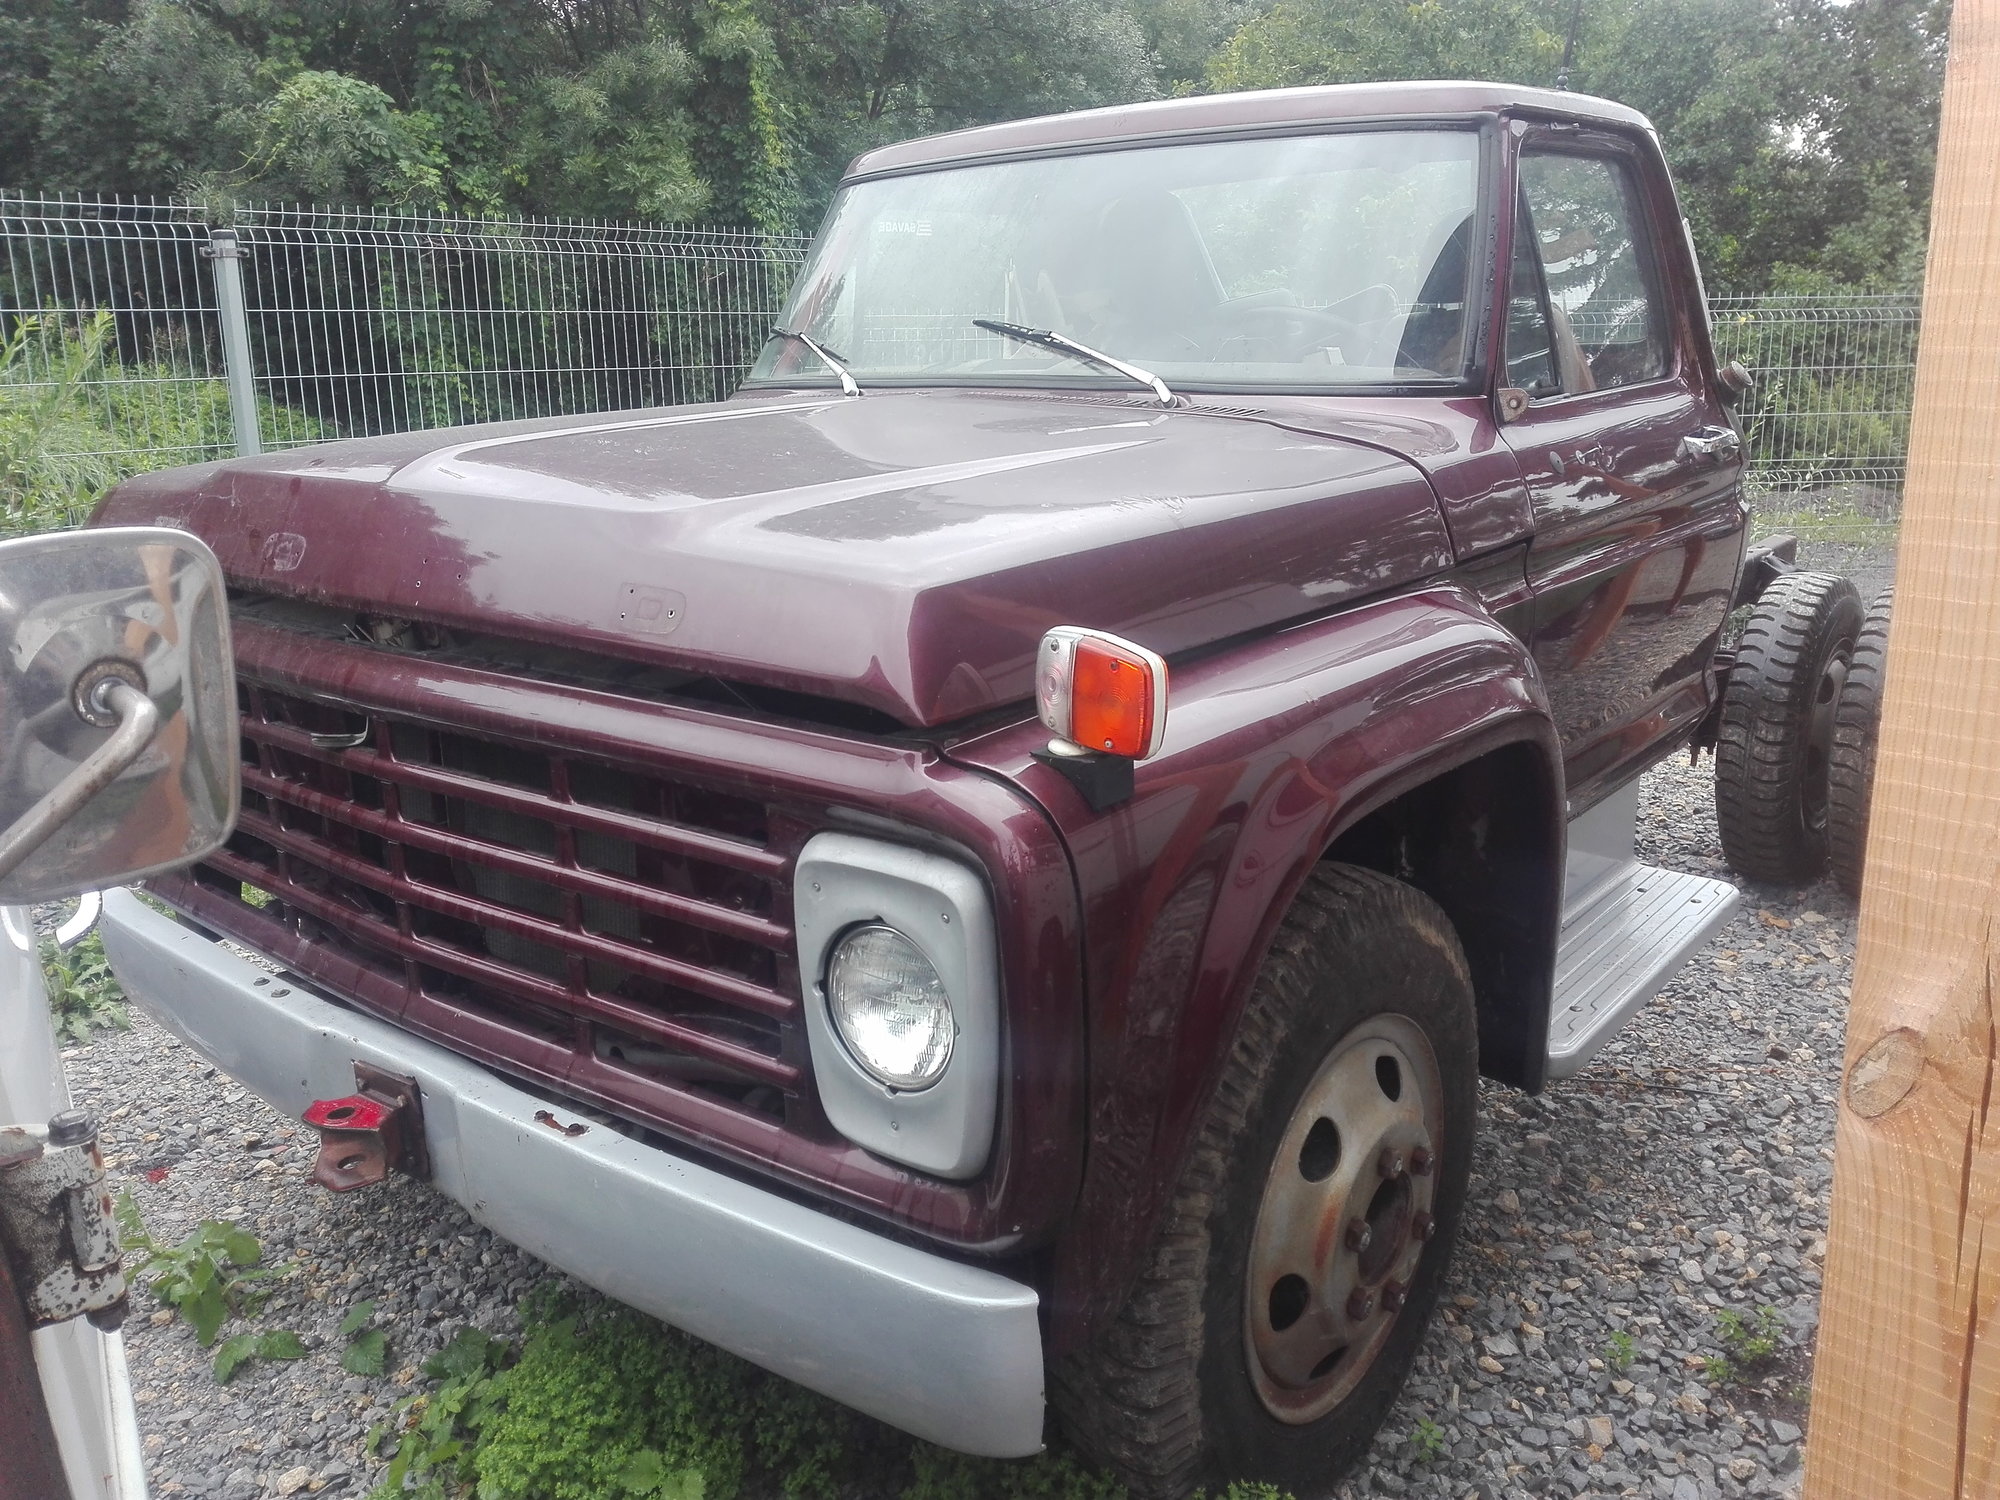 Ford F-500 1972 4.9L 300CID - Ford Truck Enthusiasts Forums